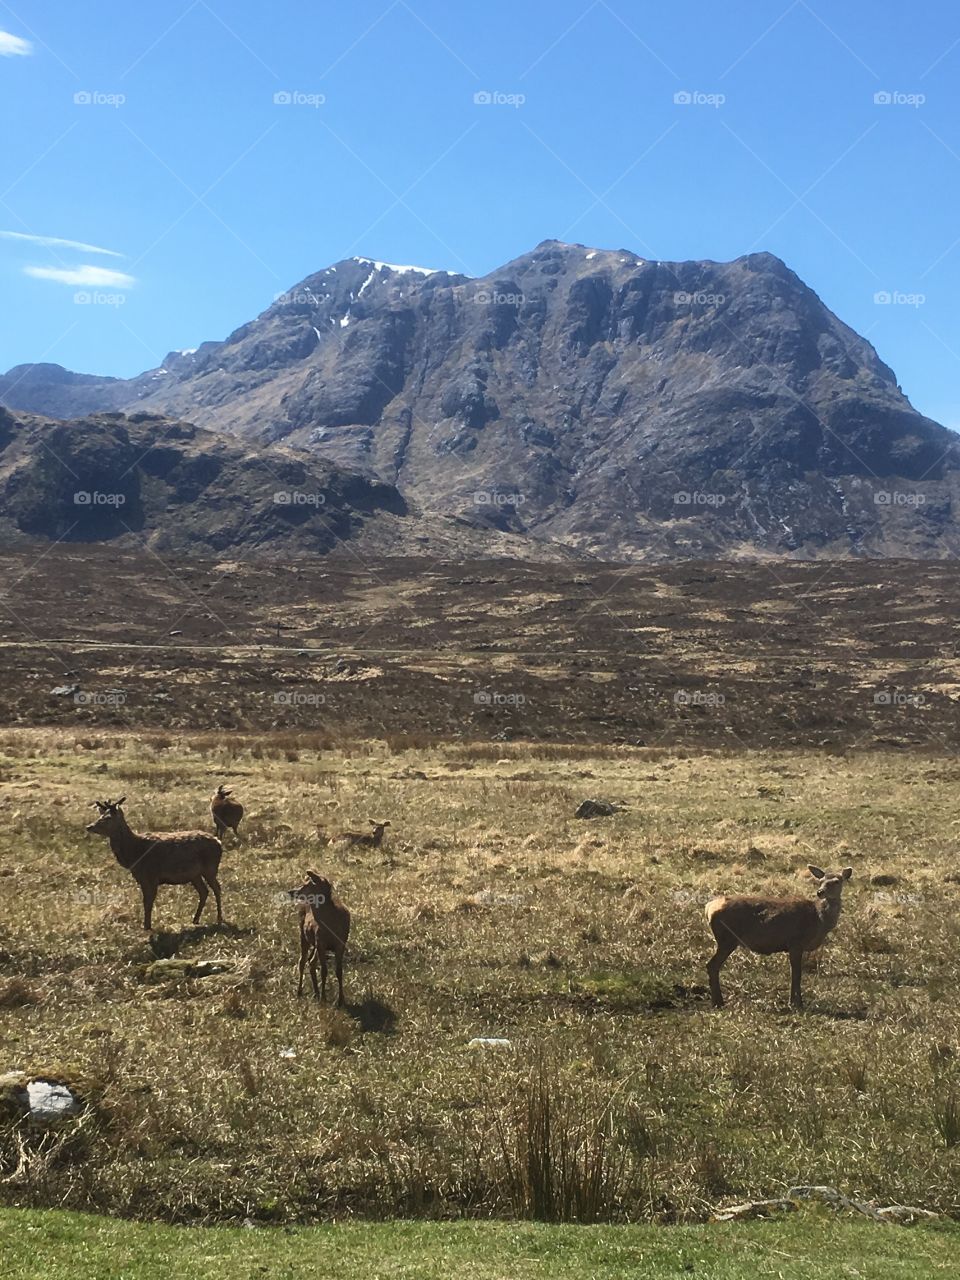 Alert. Wild deer roam the countryside of Glen Coe, Scotland. Stunning mountain backdrop on a beautiful May afternoon. 